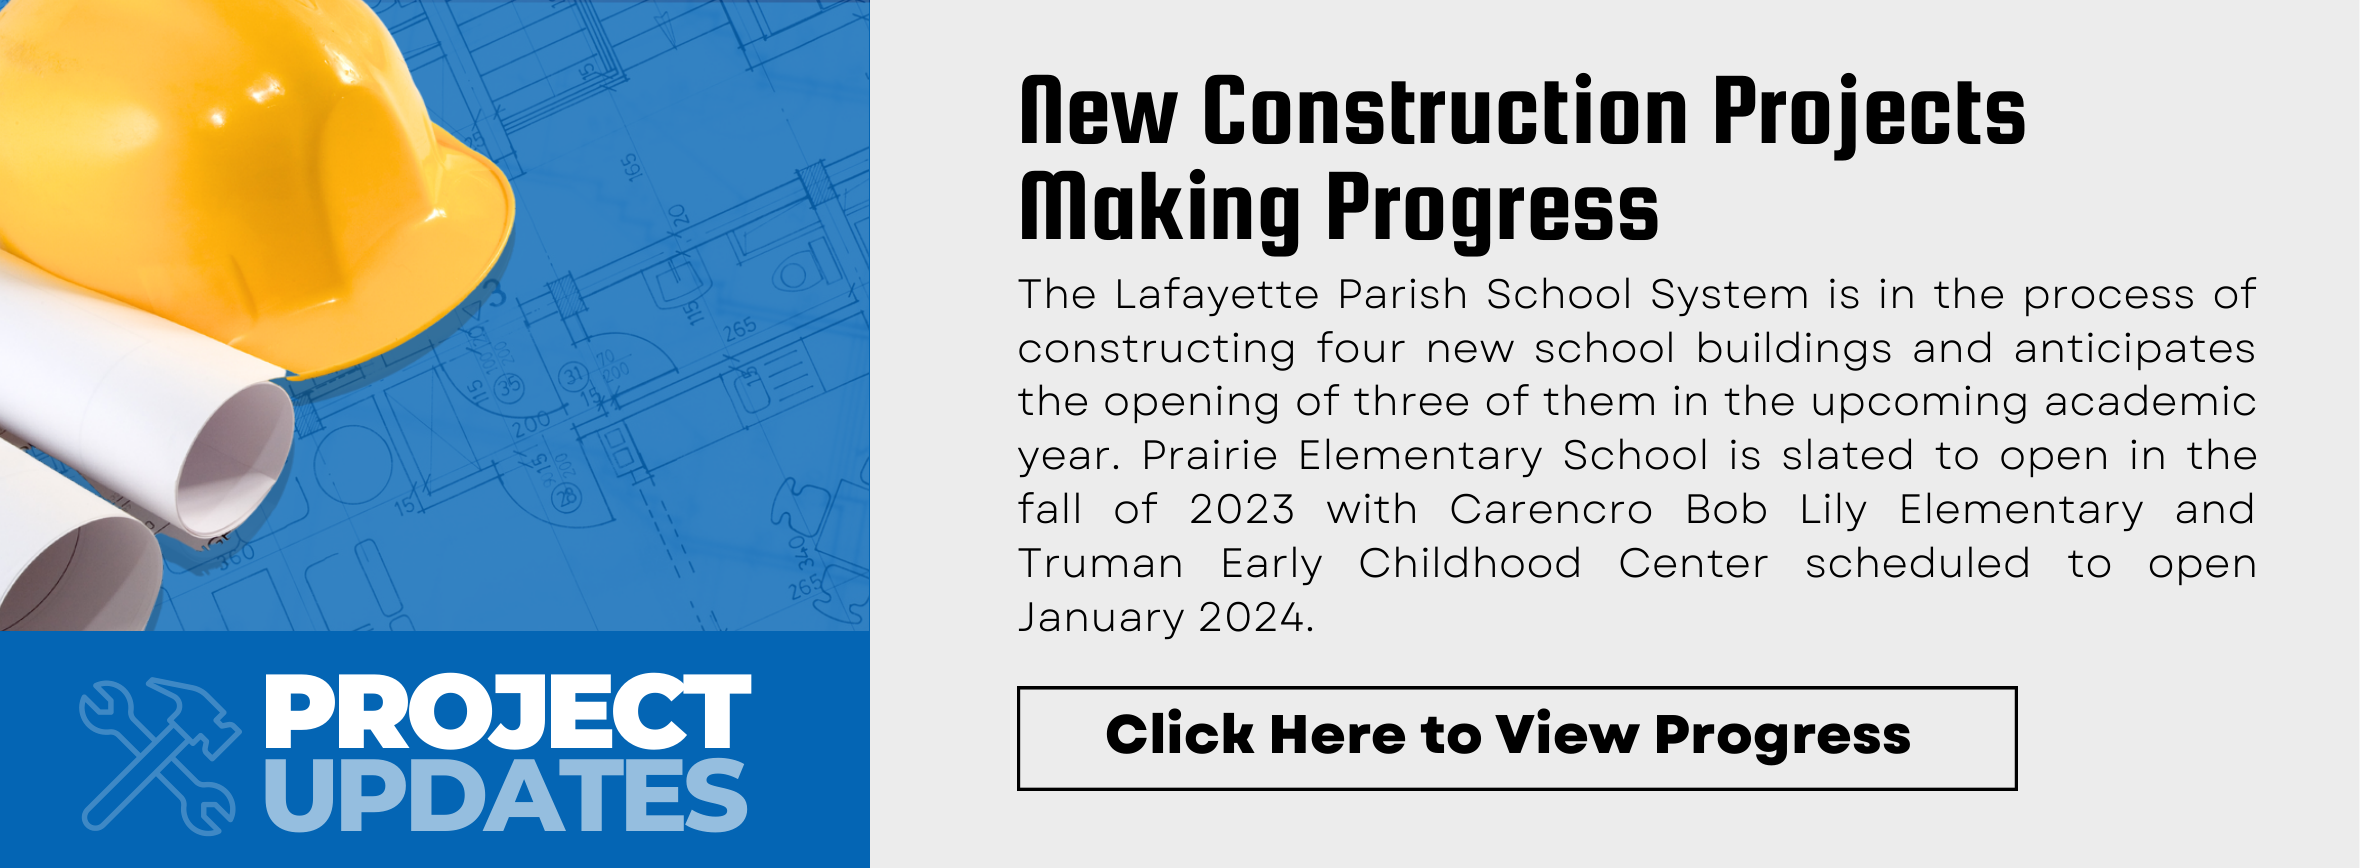 New Construction Projects Making Progress